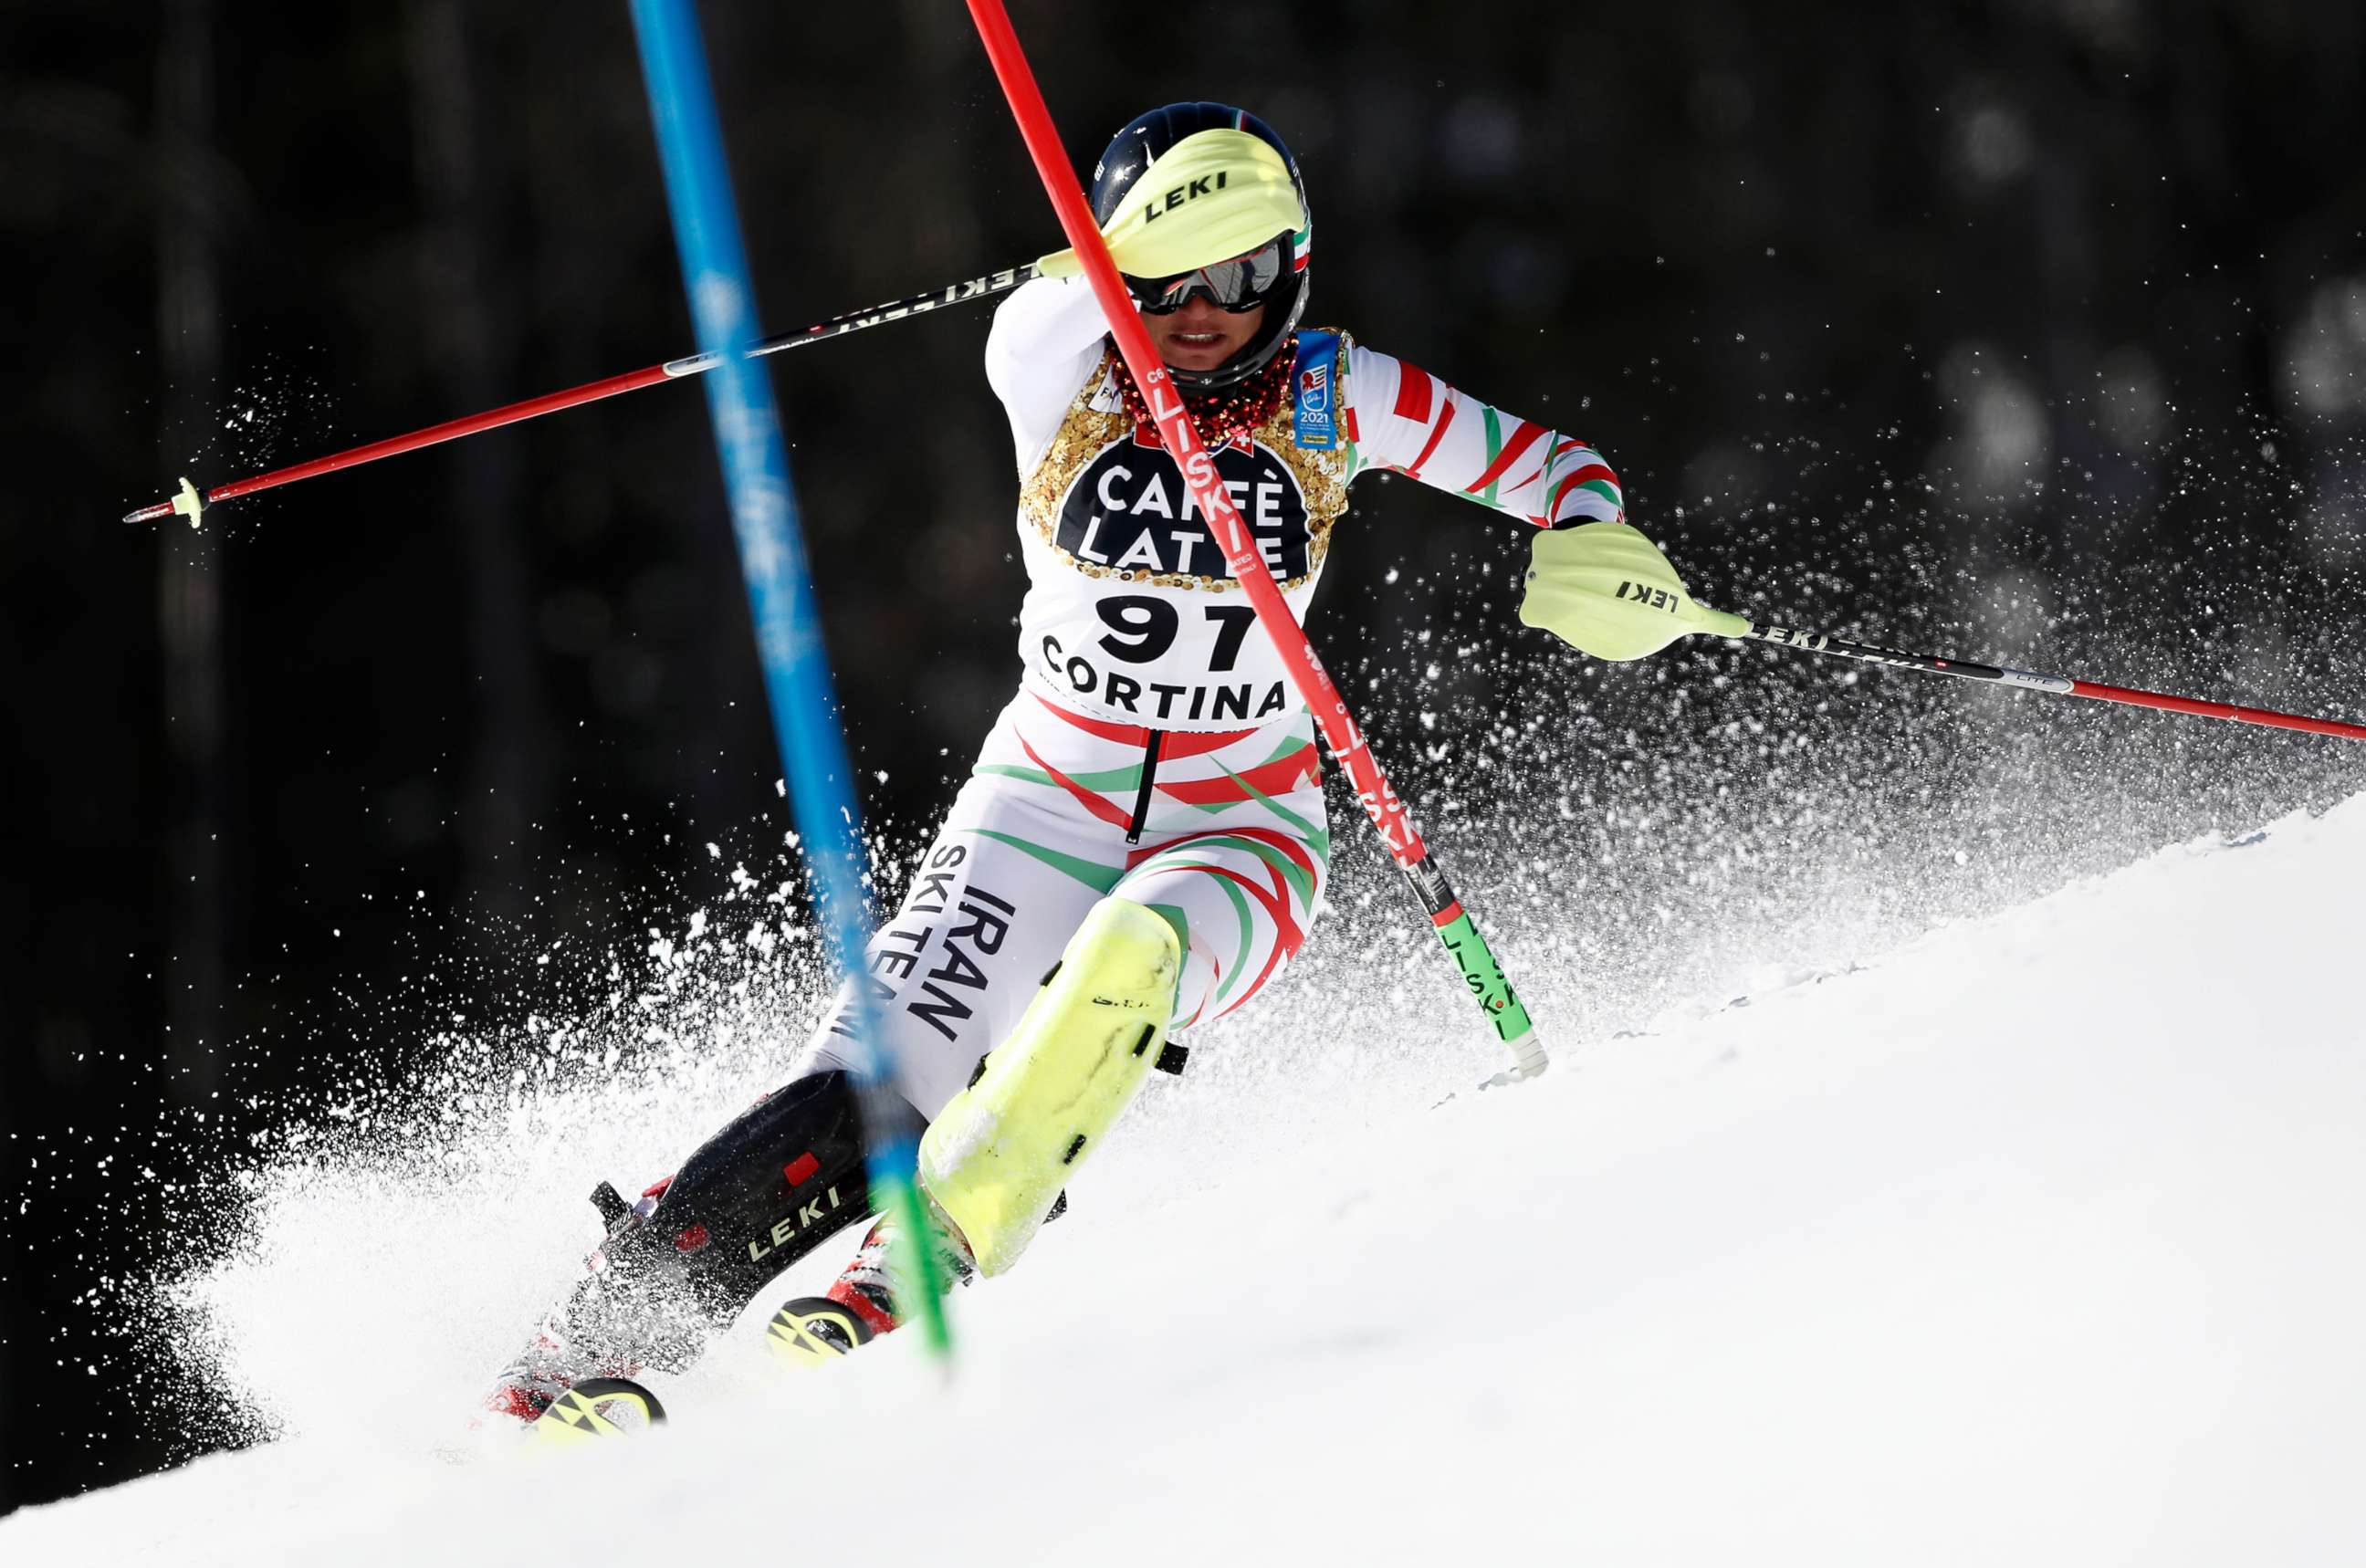 PHOTO: Iran's Marjan Kalhor competes during a women's slalom, at the alpine ski World Championships in Cortina d'Ampezzo, Italy, Feb. 20, 2021.